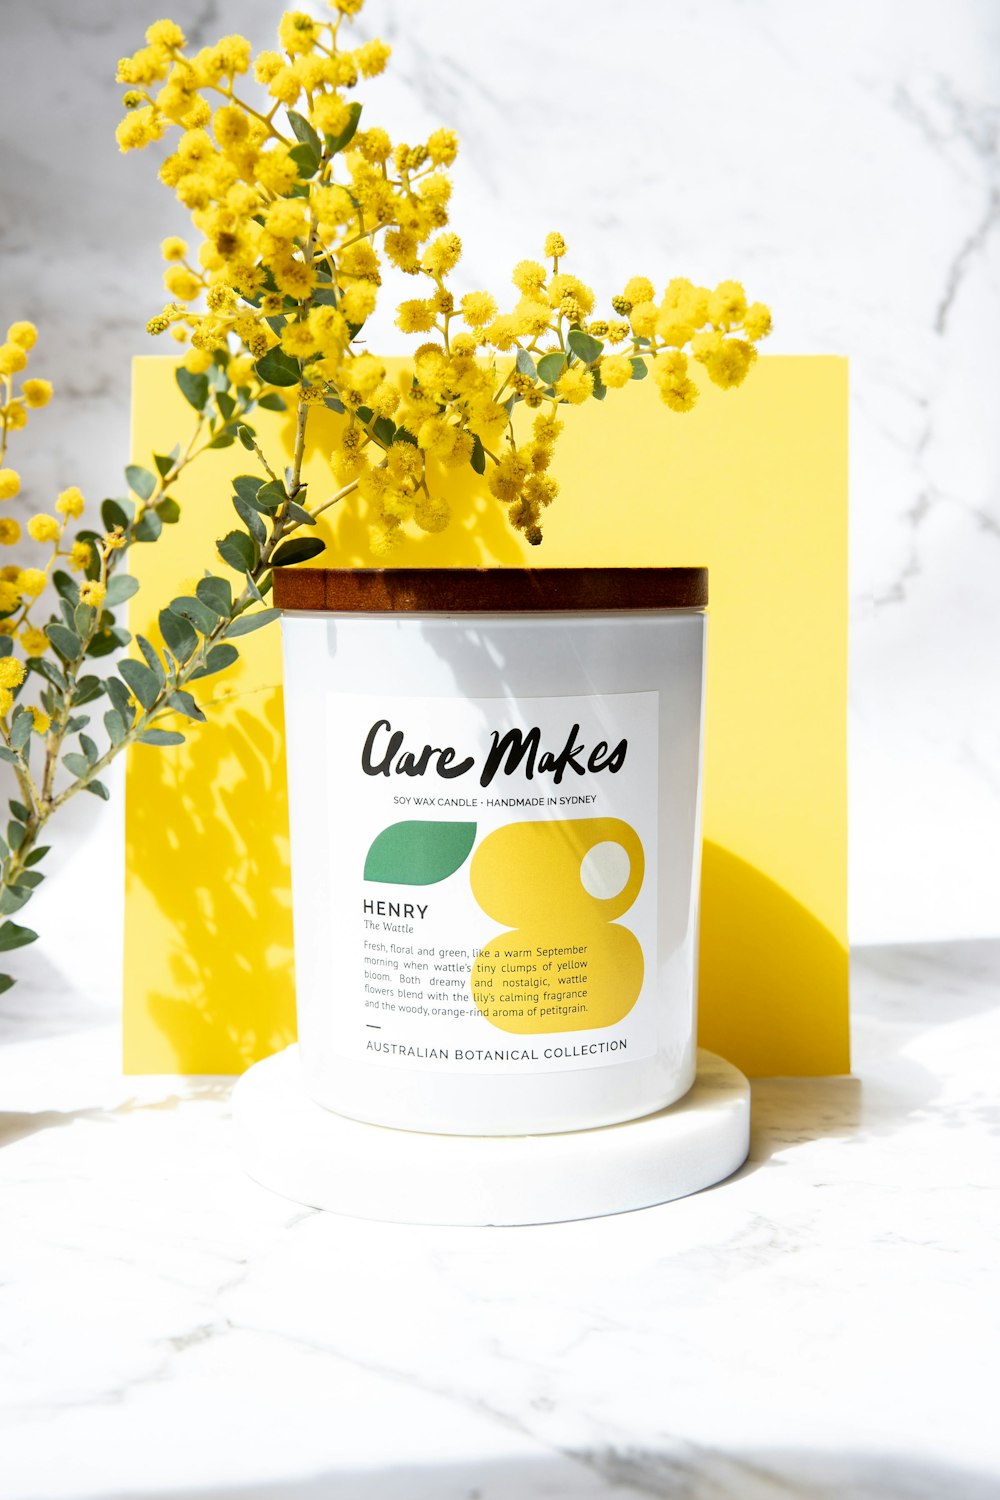 a can of care mixes next to some yellow flowers